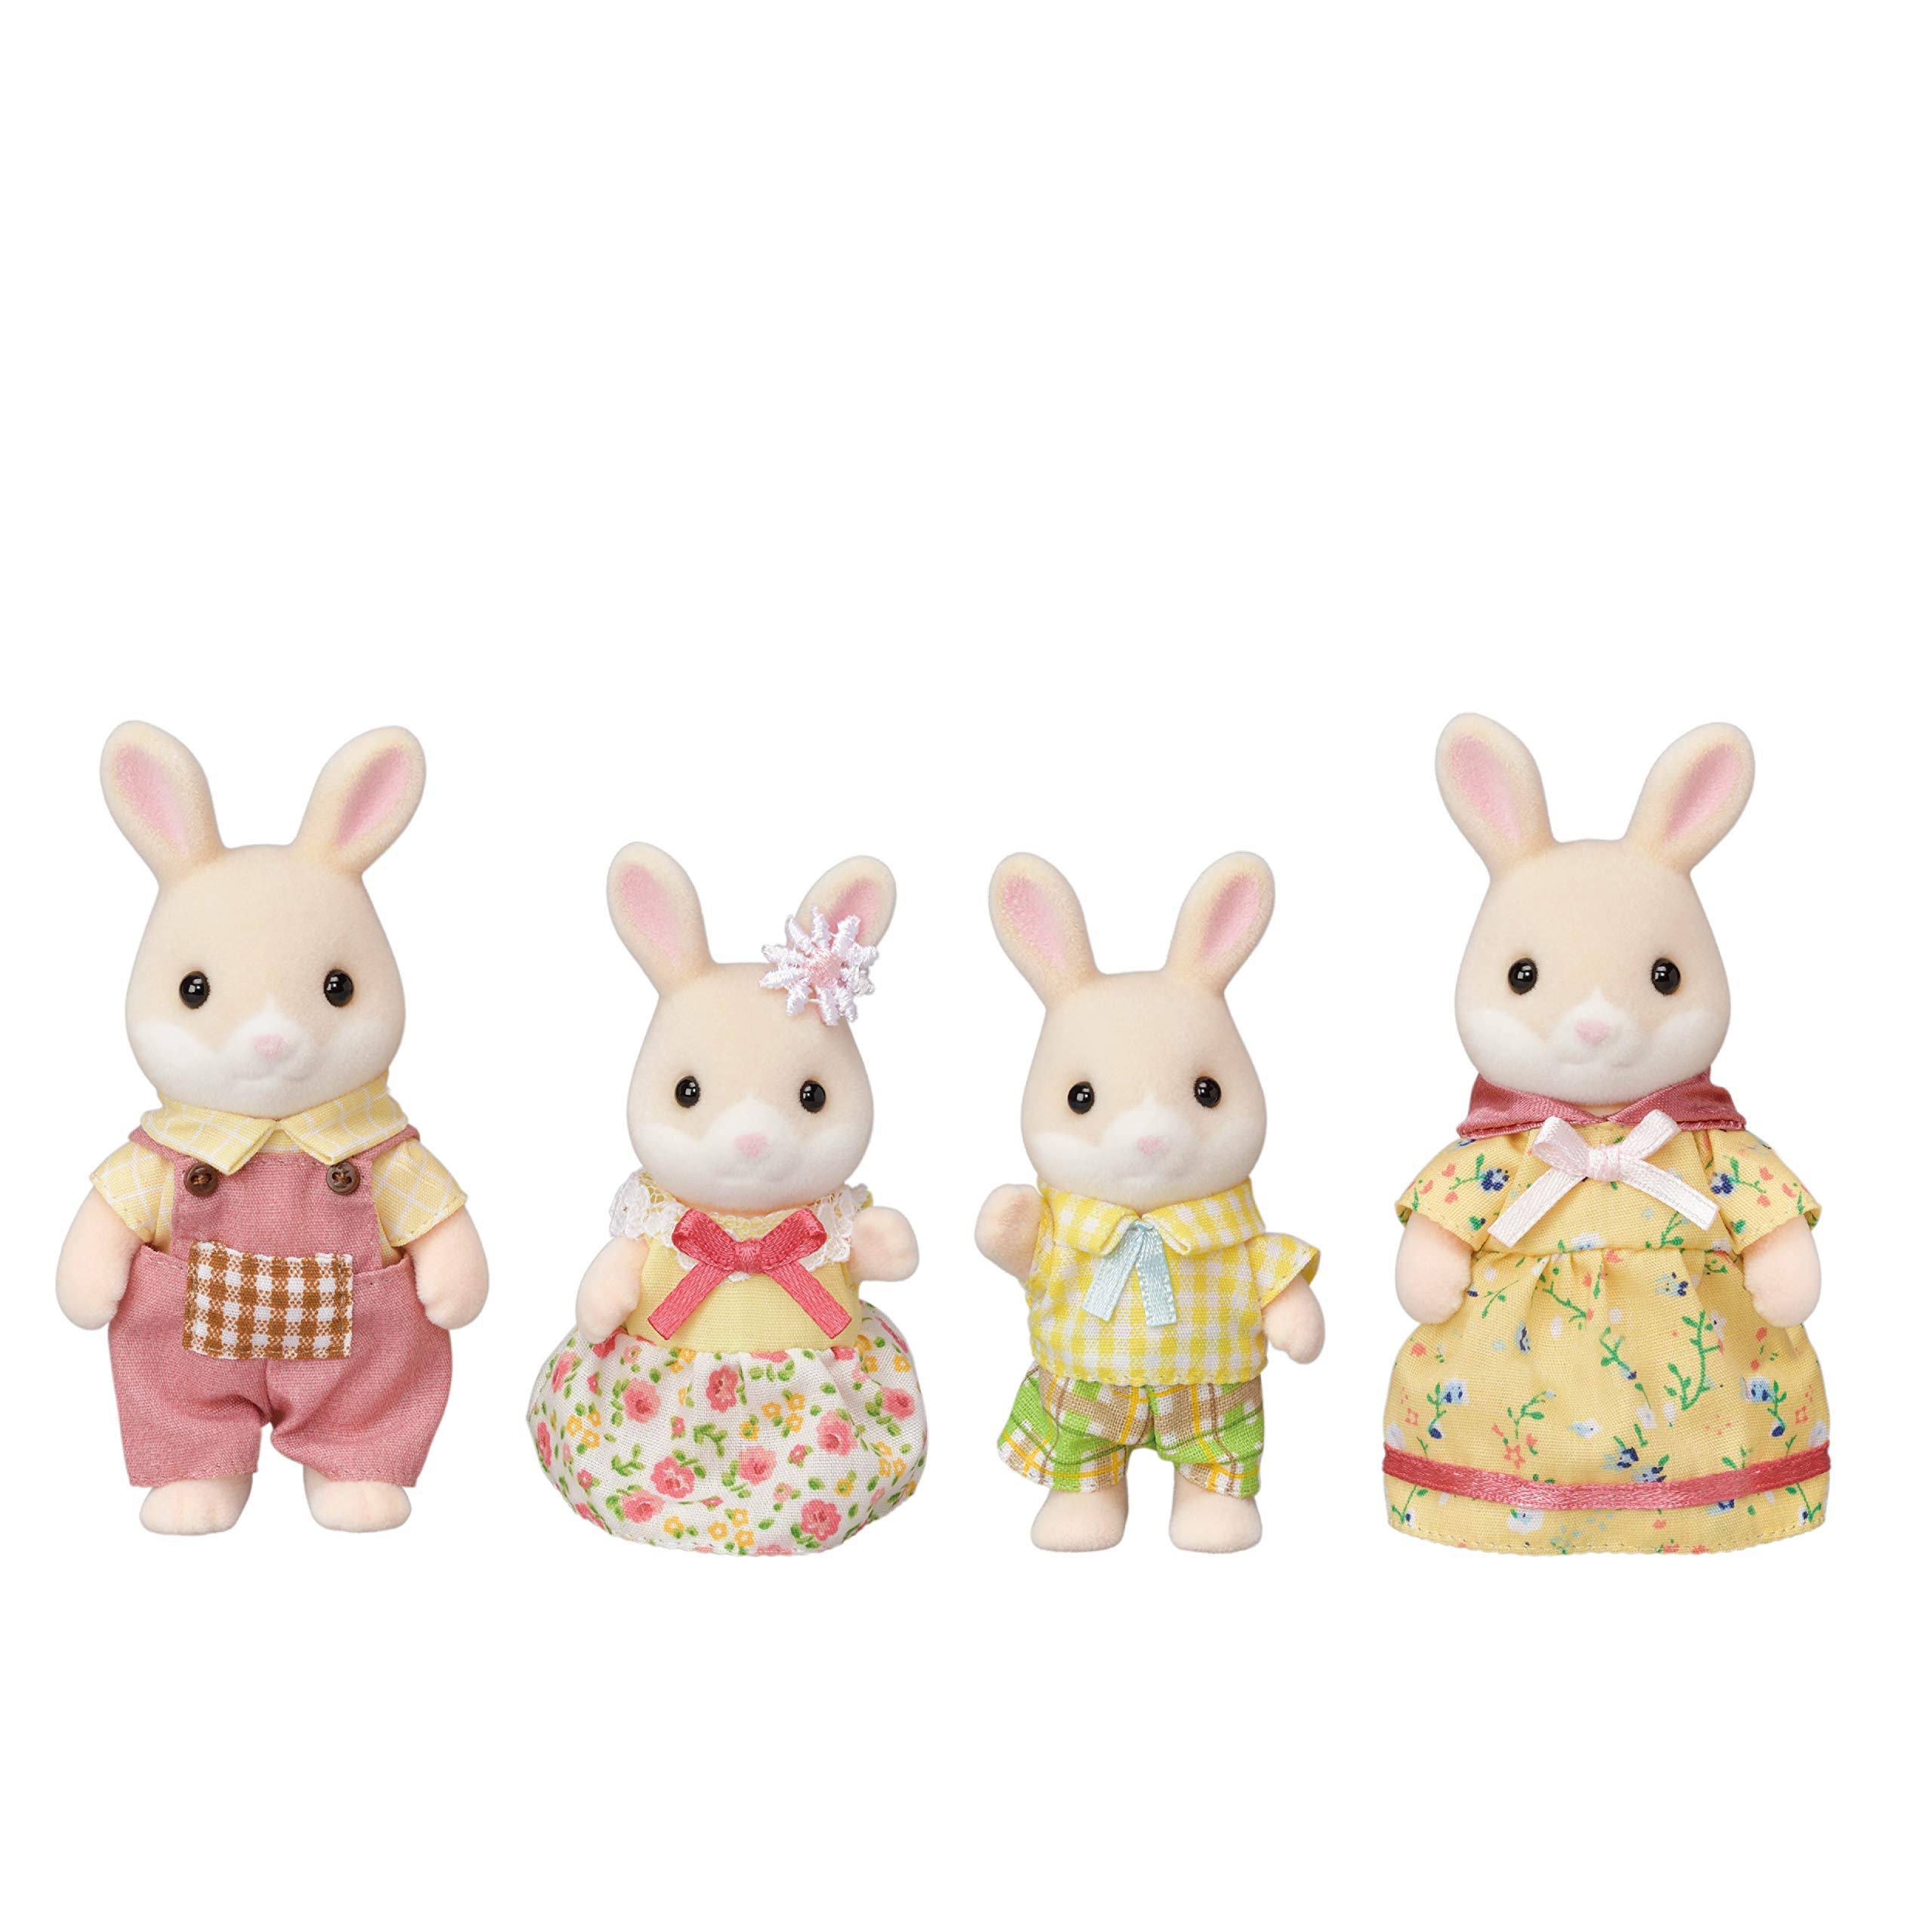 Calico Critters Marguerite Rabbit Family Dolls, 35th Anniversary, Limited Edition